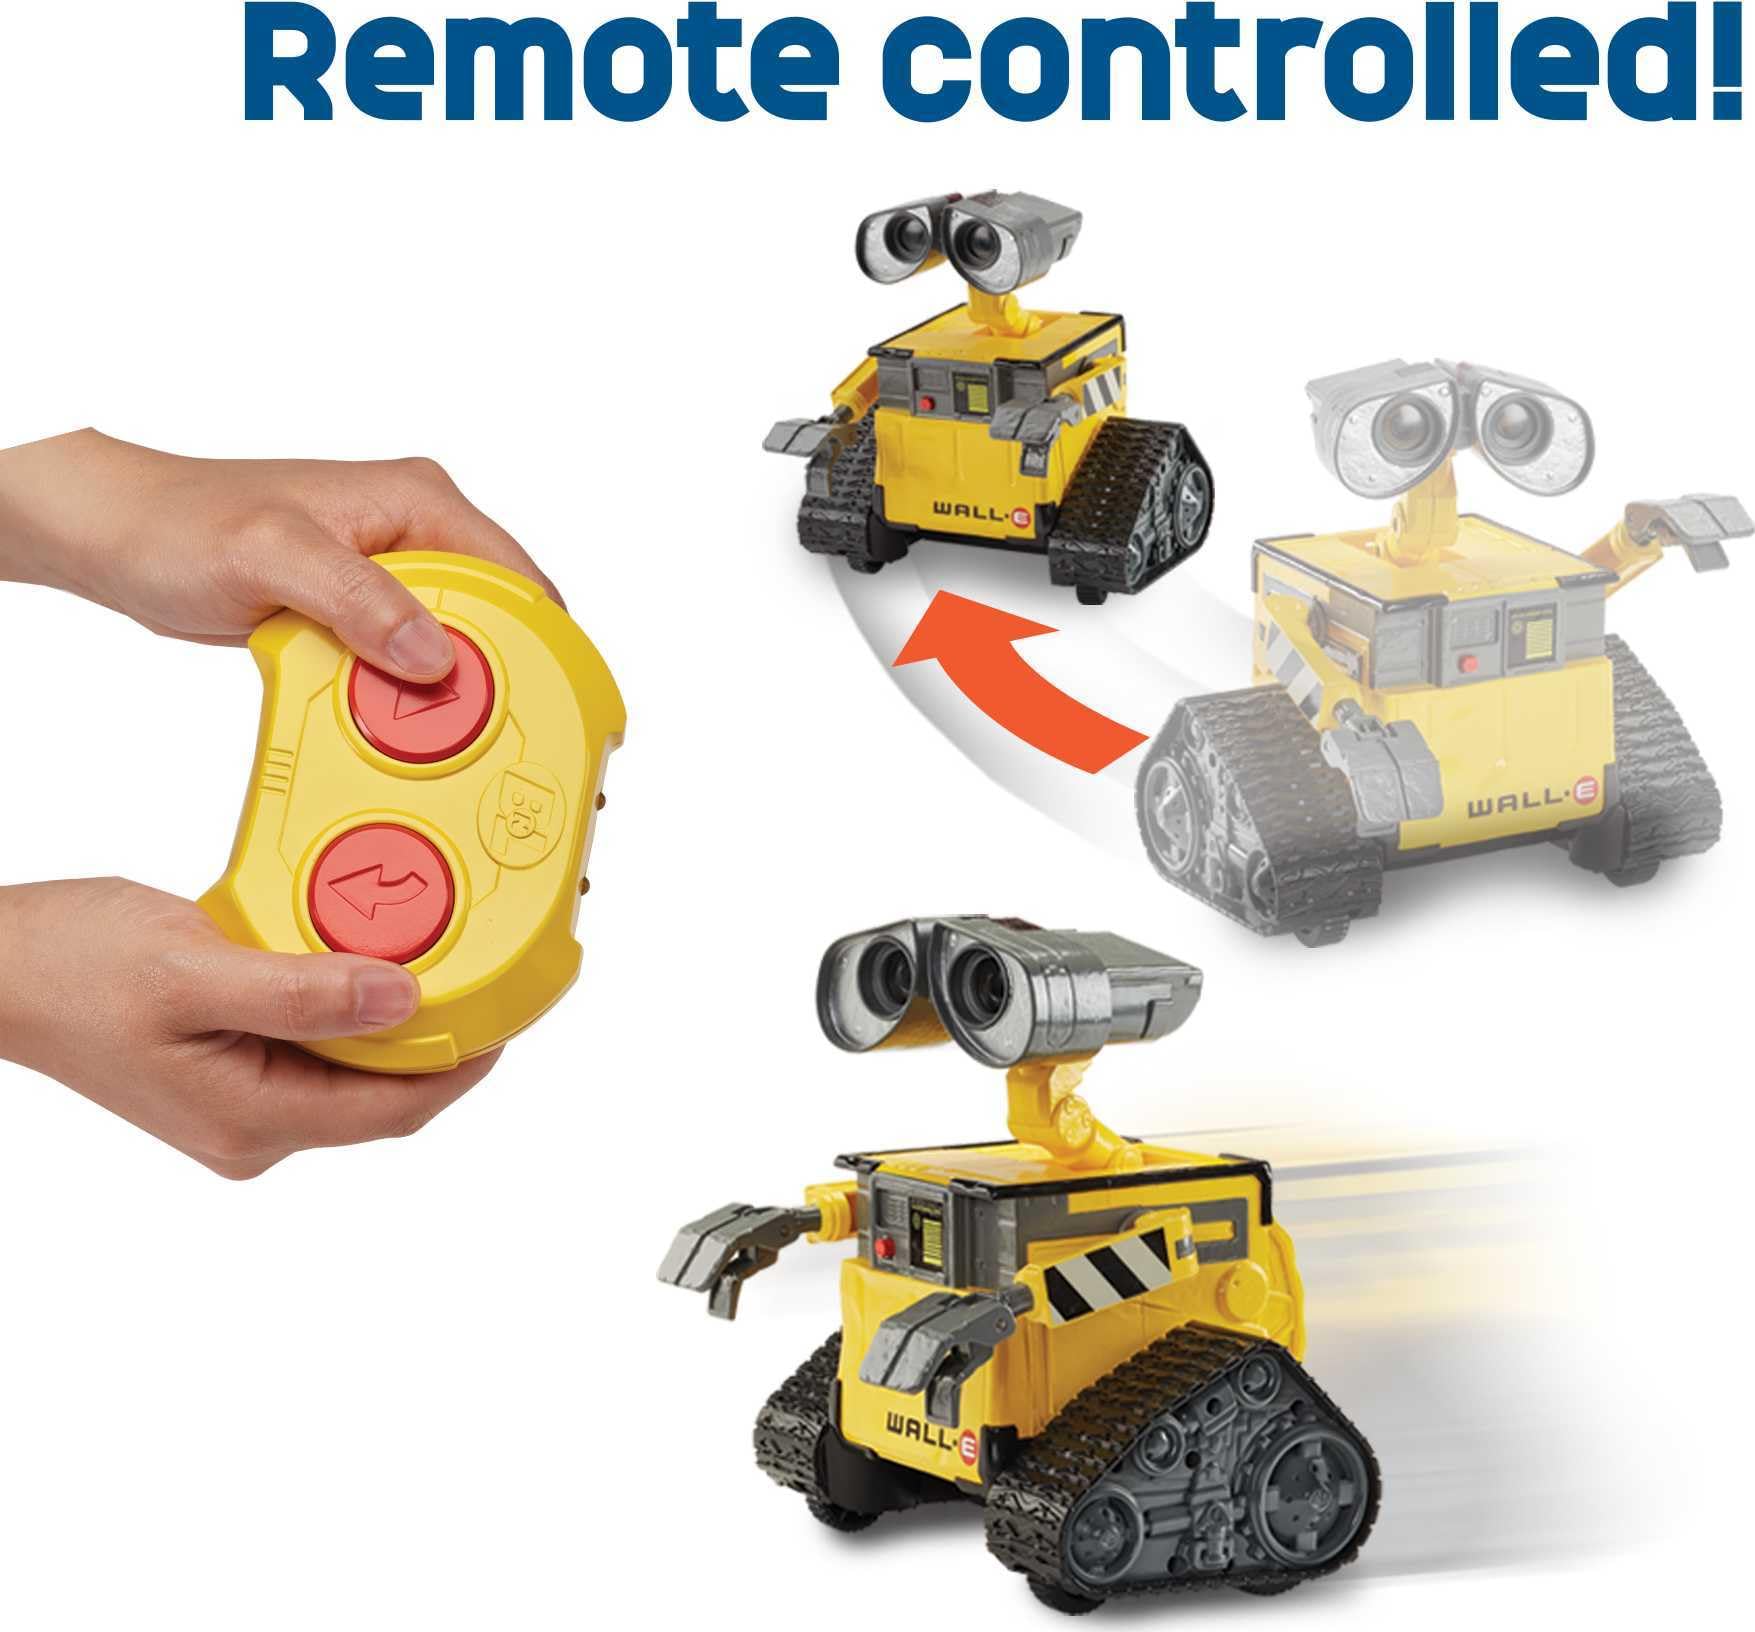 Disney and Pixar WALL-E Robot Toy, Remote Control Hello WALL-E Robot Figure, Gifts for Kids (Amazon Exclusive)